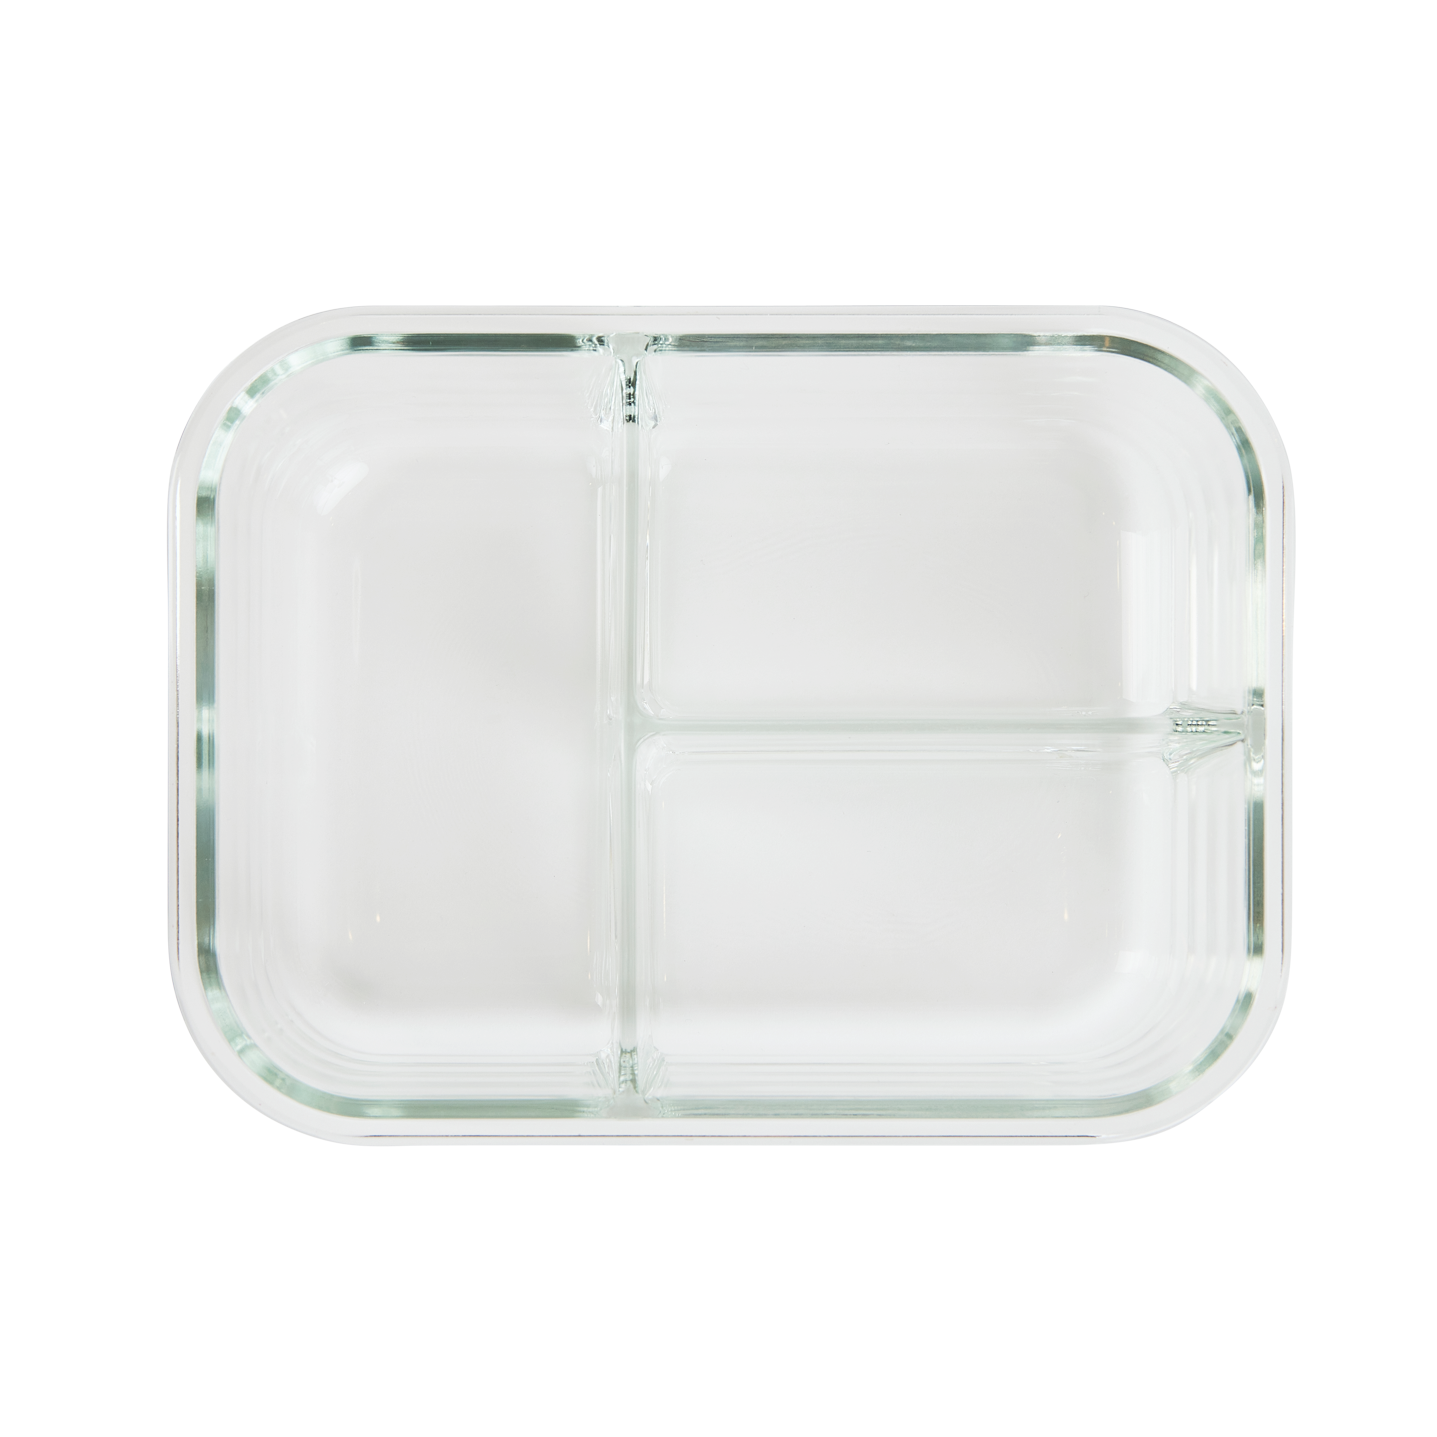 Erewhon 3-Section Glass Storage Containers